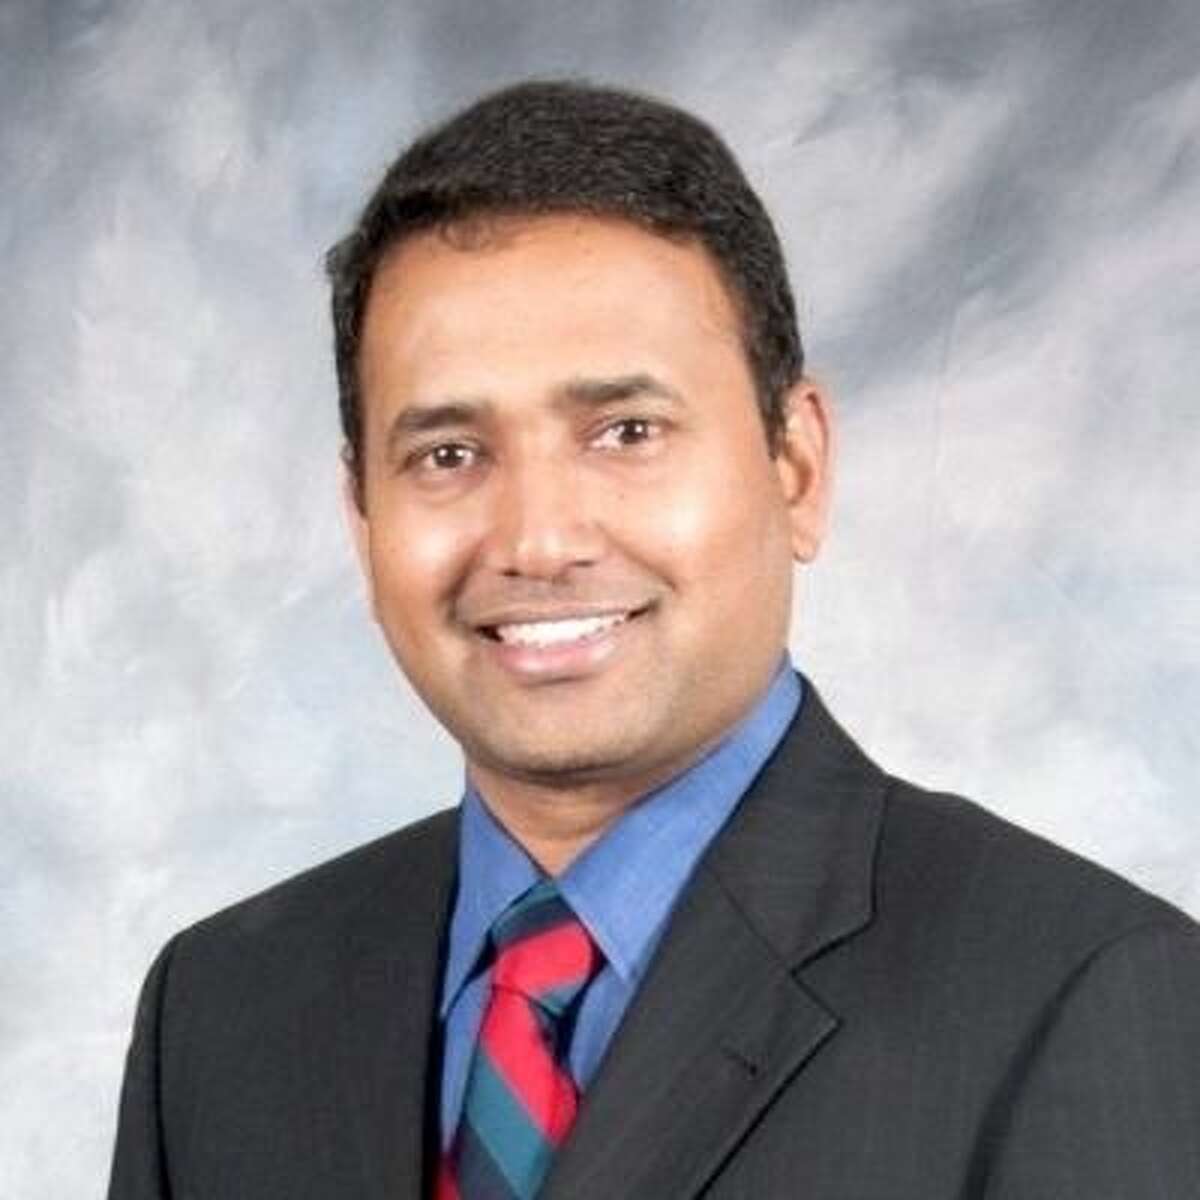 Dr. Satish Iduru of Houston Methodist San Jacinto Hospital in Baytown will lead the esophageal awareness seminar, to be held at 5 p.m., Tuesday, Aug. 11, in the Phyllis Davis Room at 909 Decker Drive.